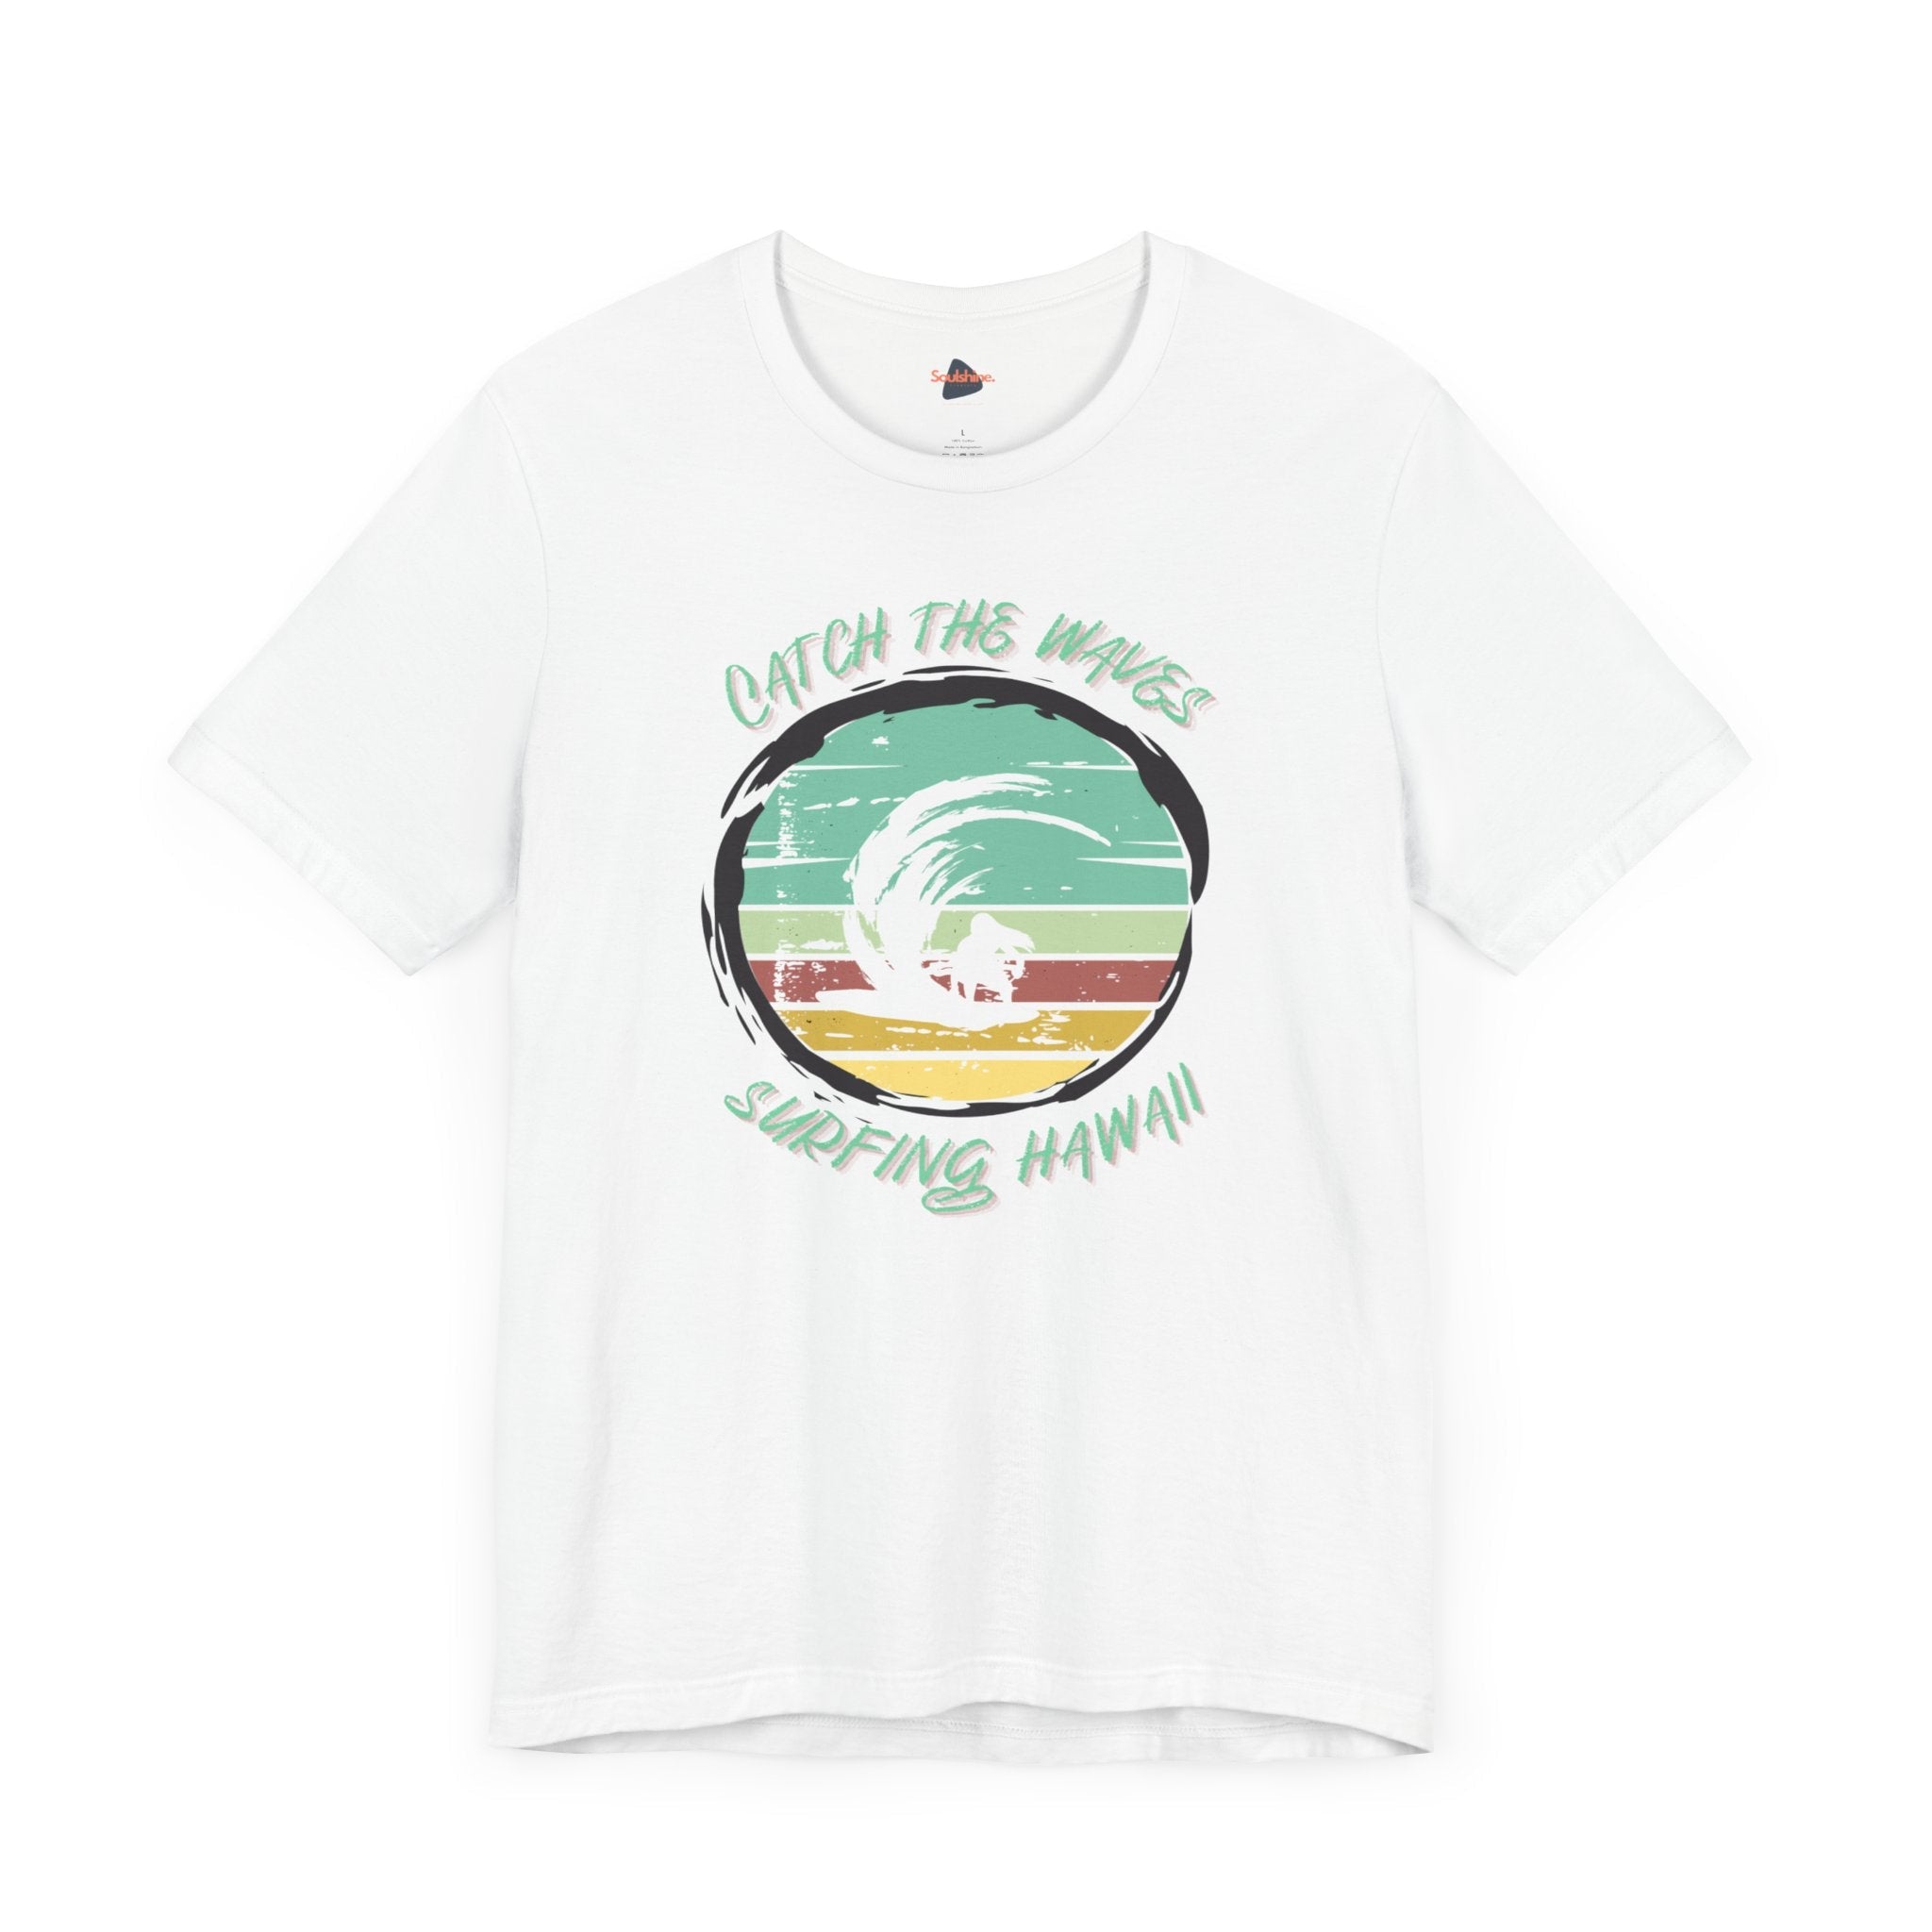 Catch the Waves Surfing T-Shirt - Direct-to-Garment Printed White Tee with Palm Tree and Wave